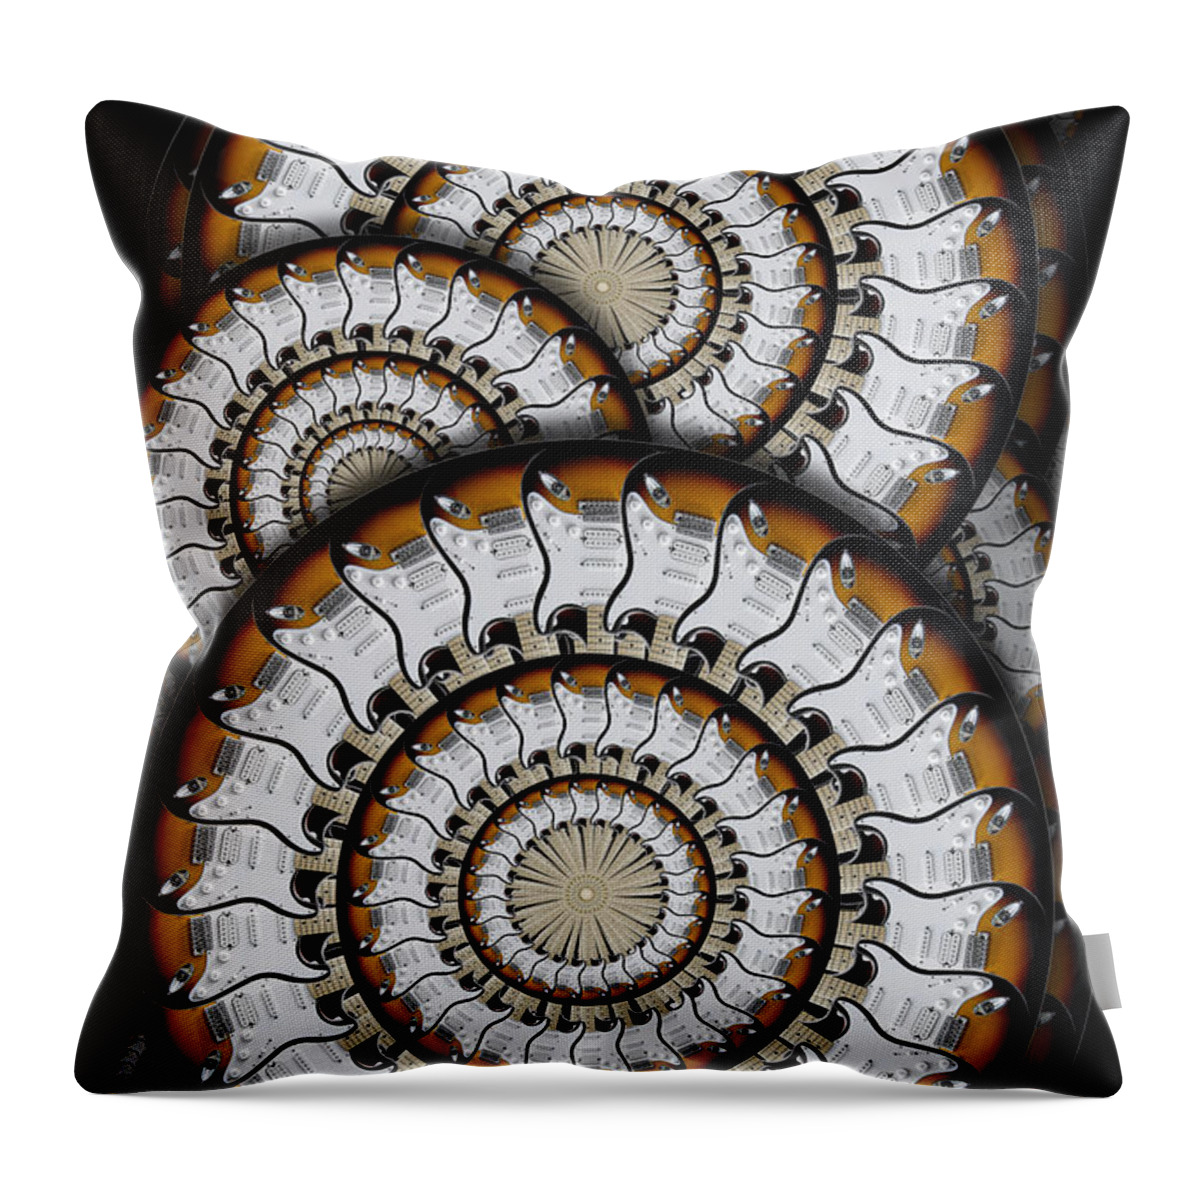 Abstract Guitars Throw Pillow featuring the photograph Spinning Guitars 3 by Mike McGlothlen